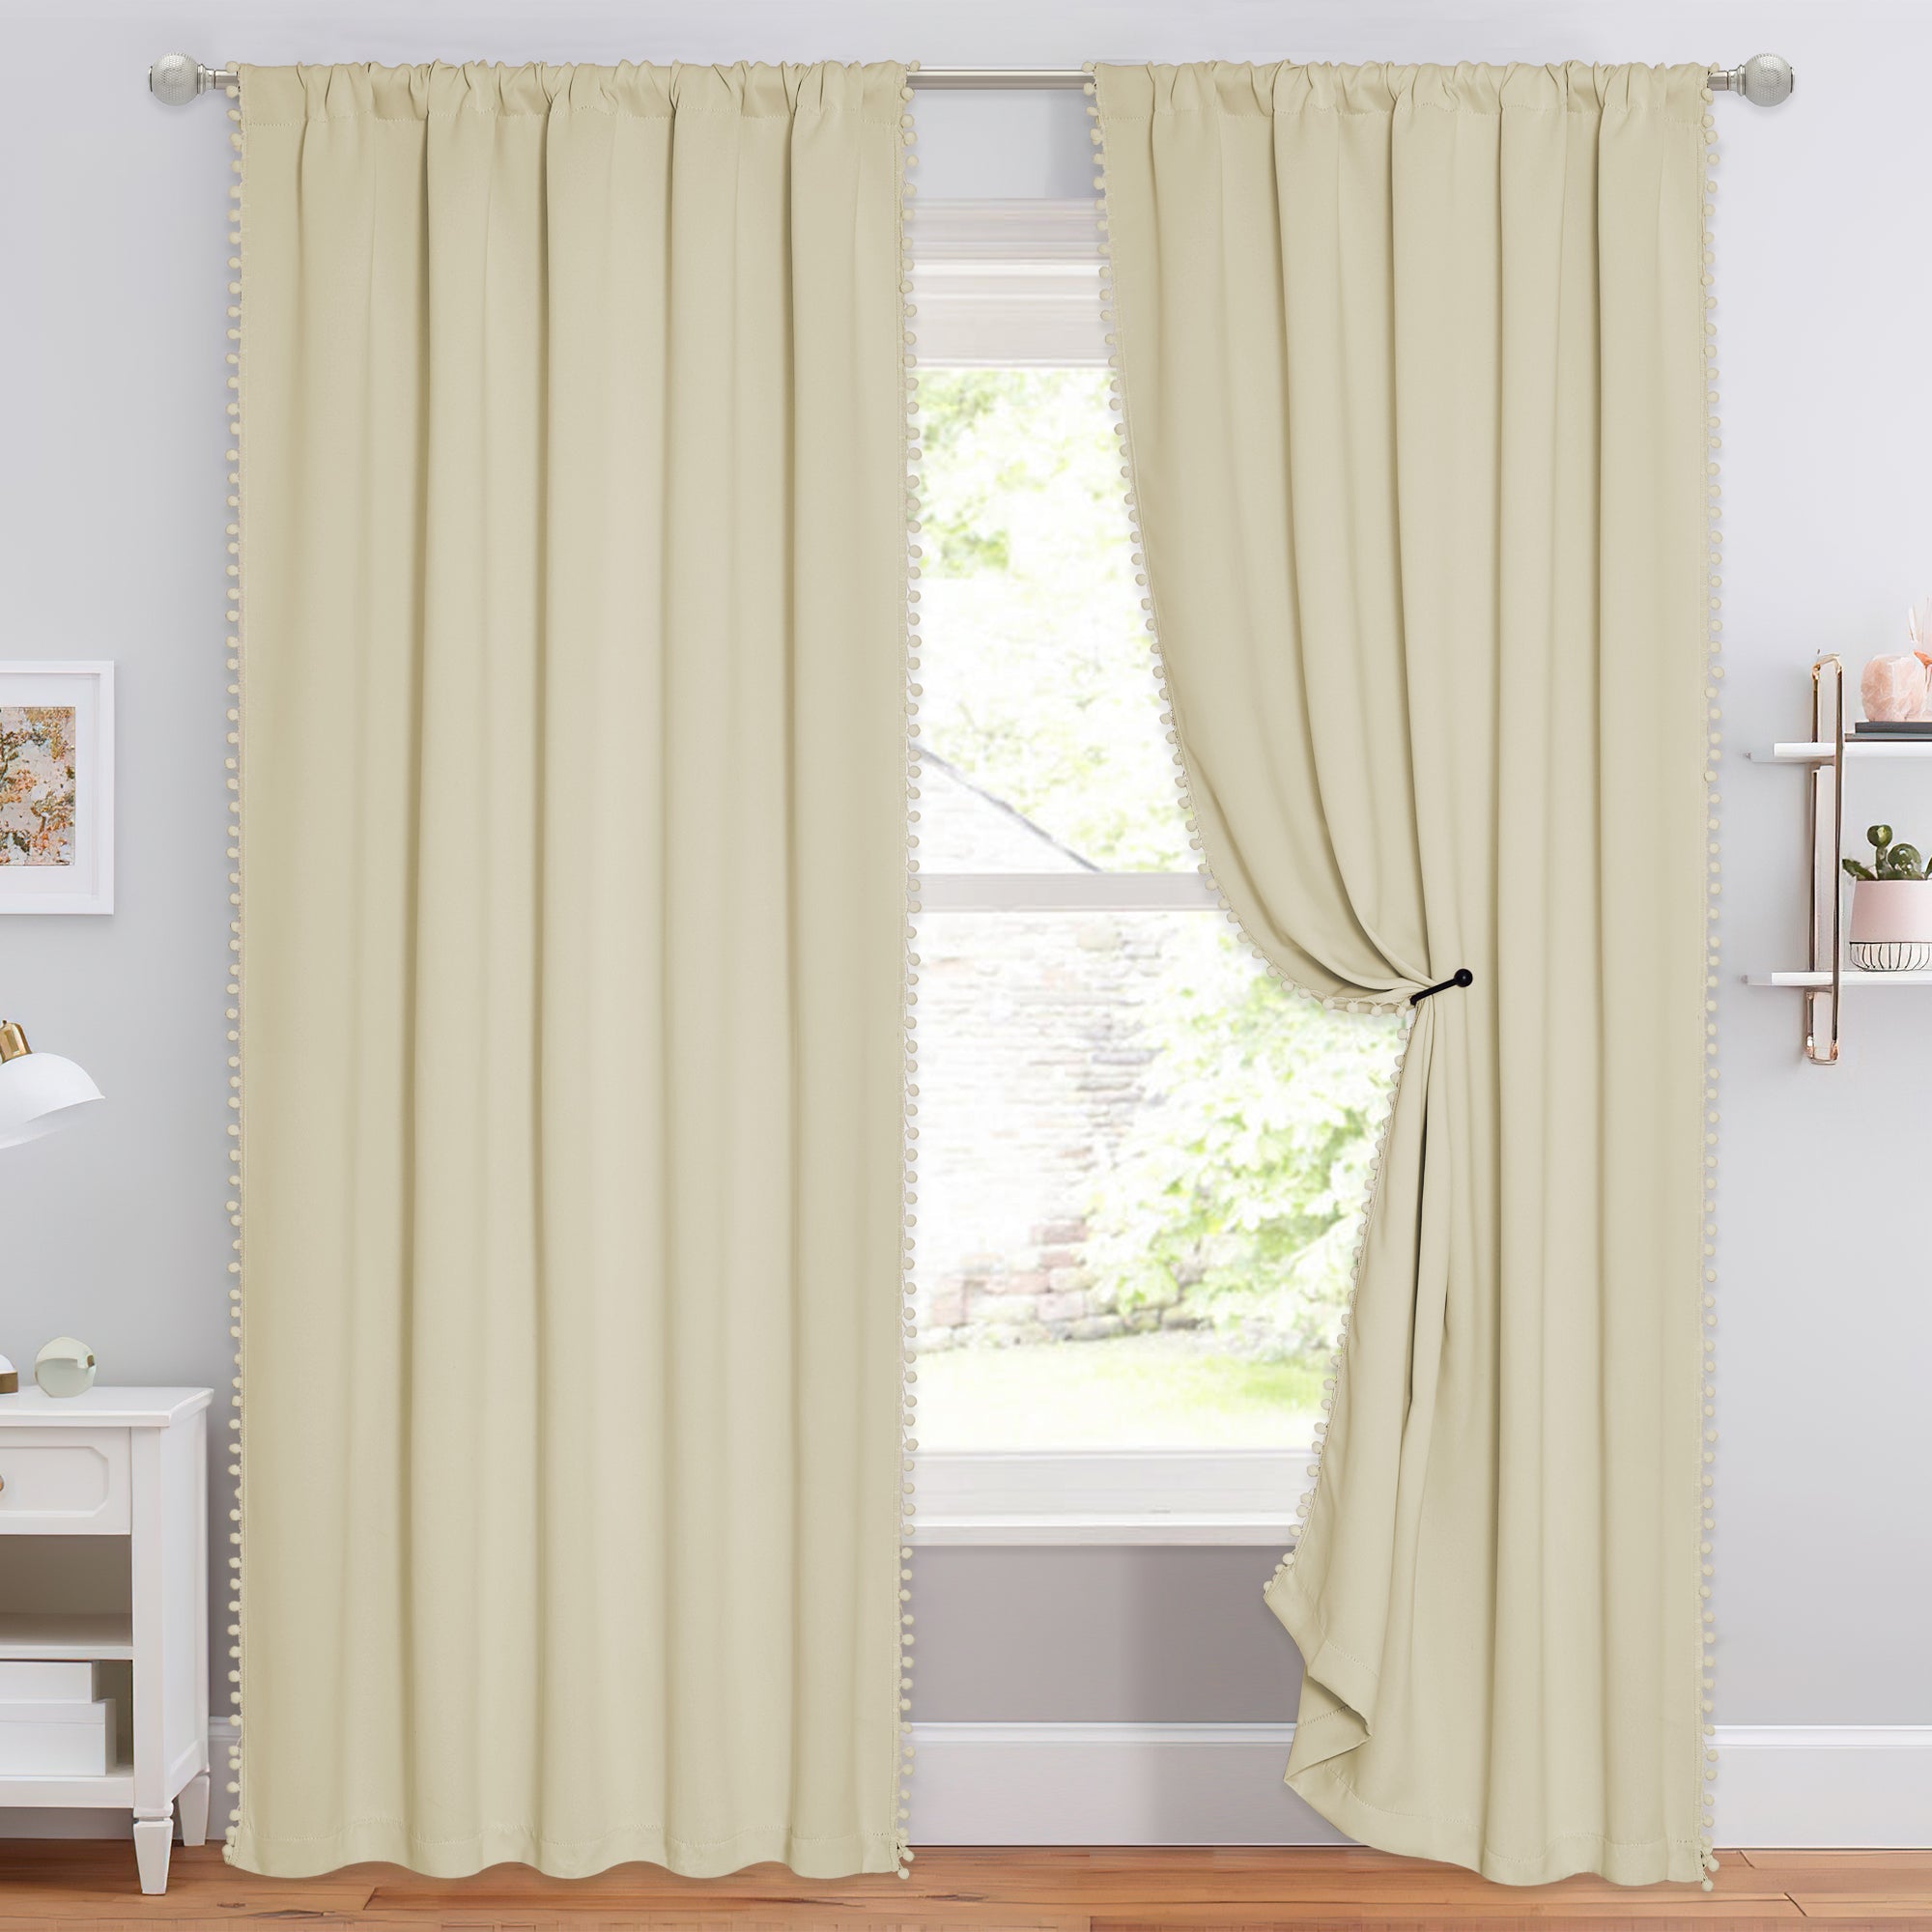 Pom Pom Rod Pocket Thermal Insulated Blackout Curtains For Living Room And Bedroom 2 Panels KGORGE Store